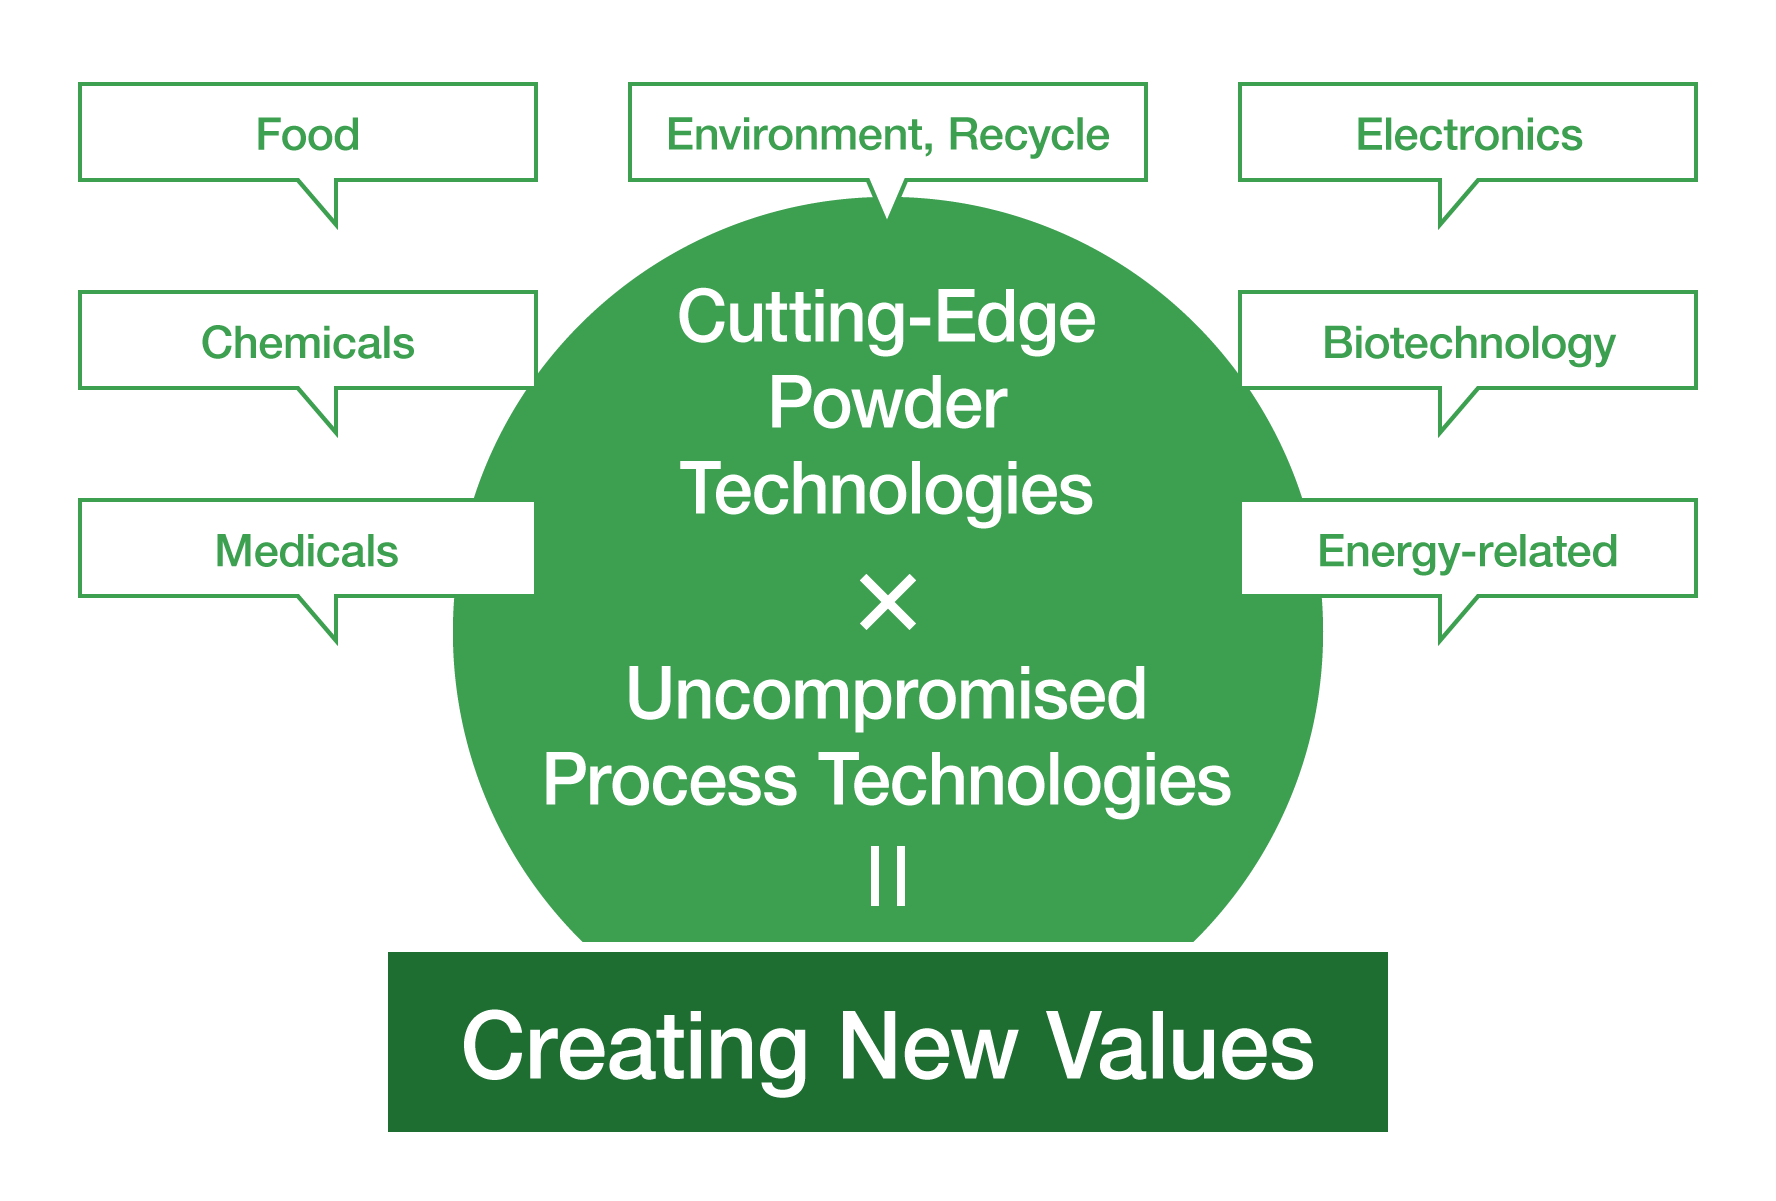 Cutting-Edge Powder Technologies * Uncompromised Process Technologies = Creating New Values